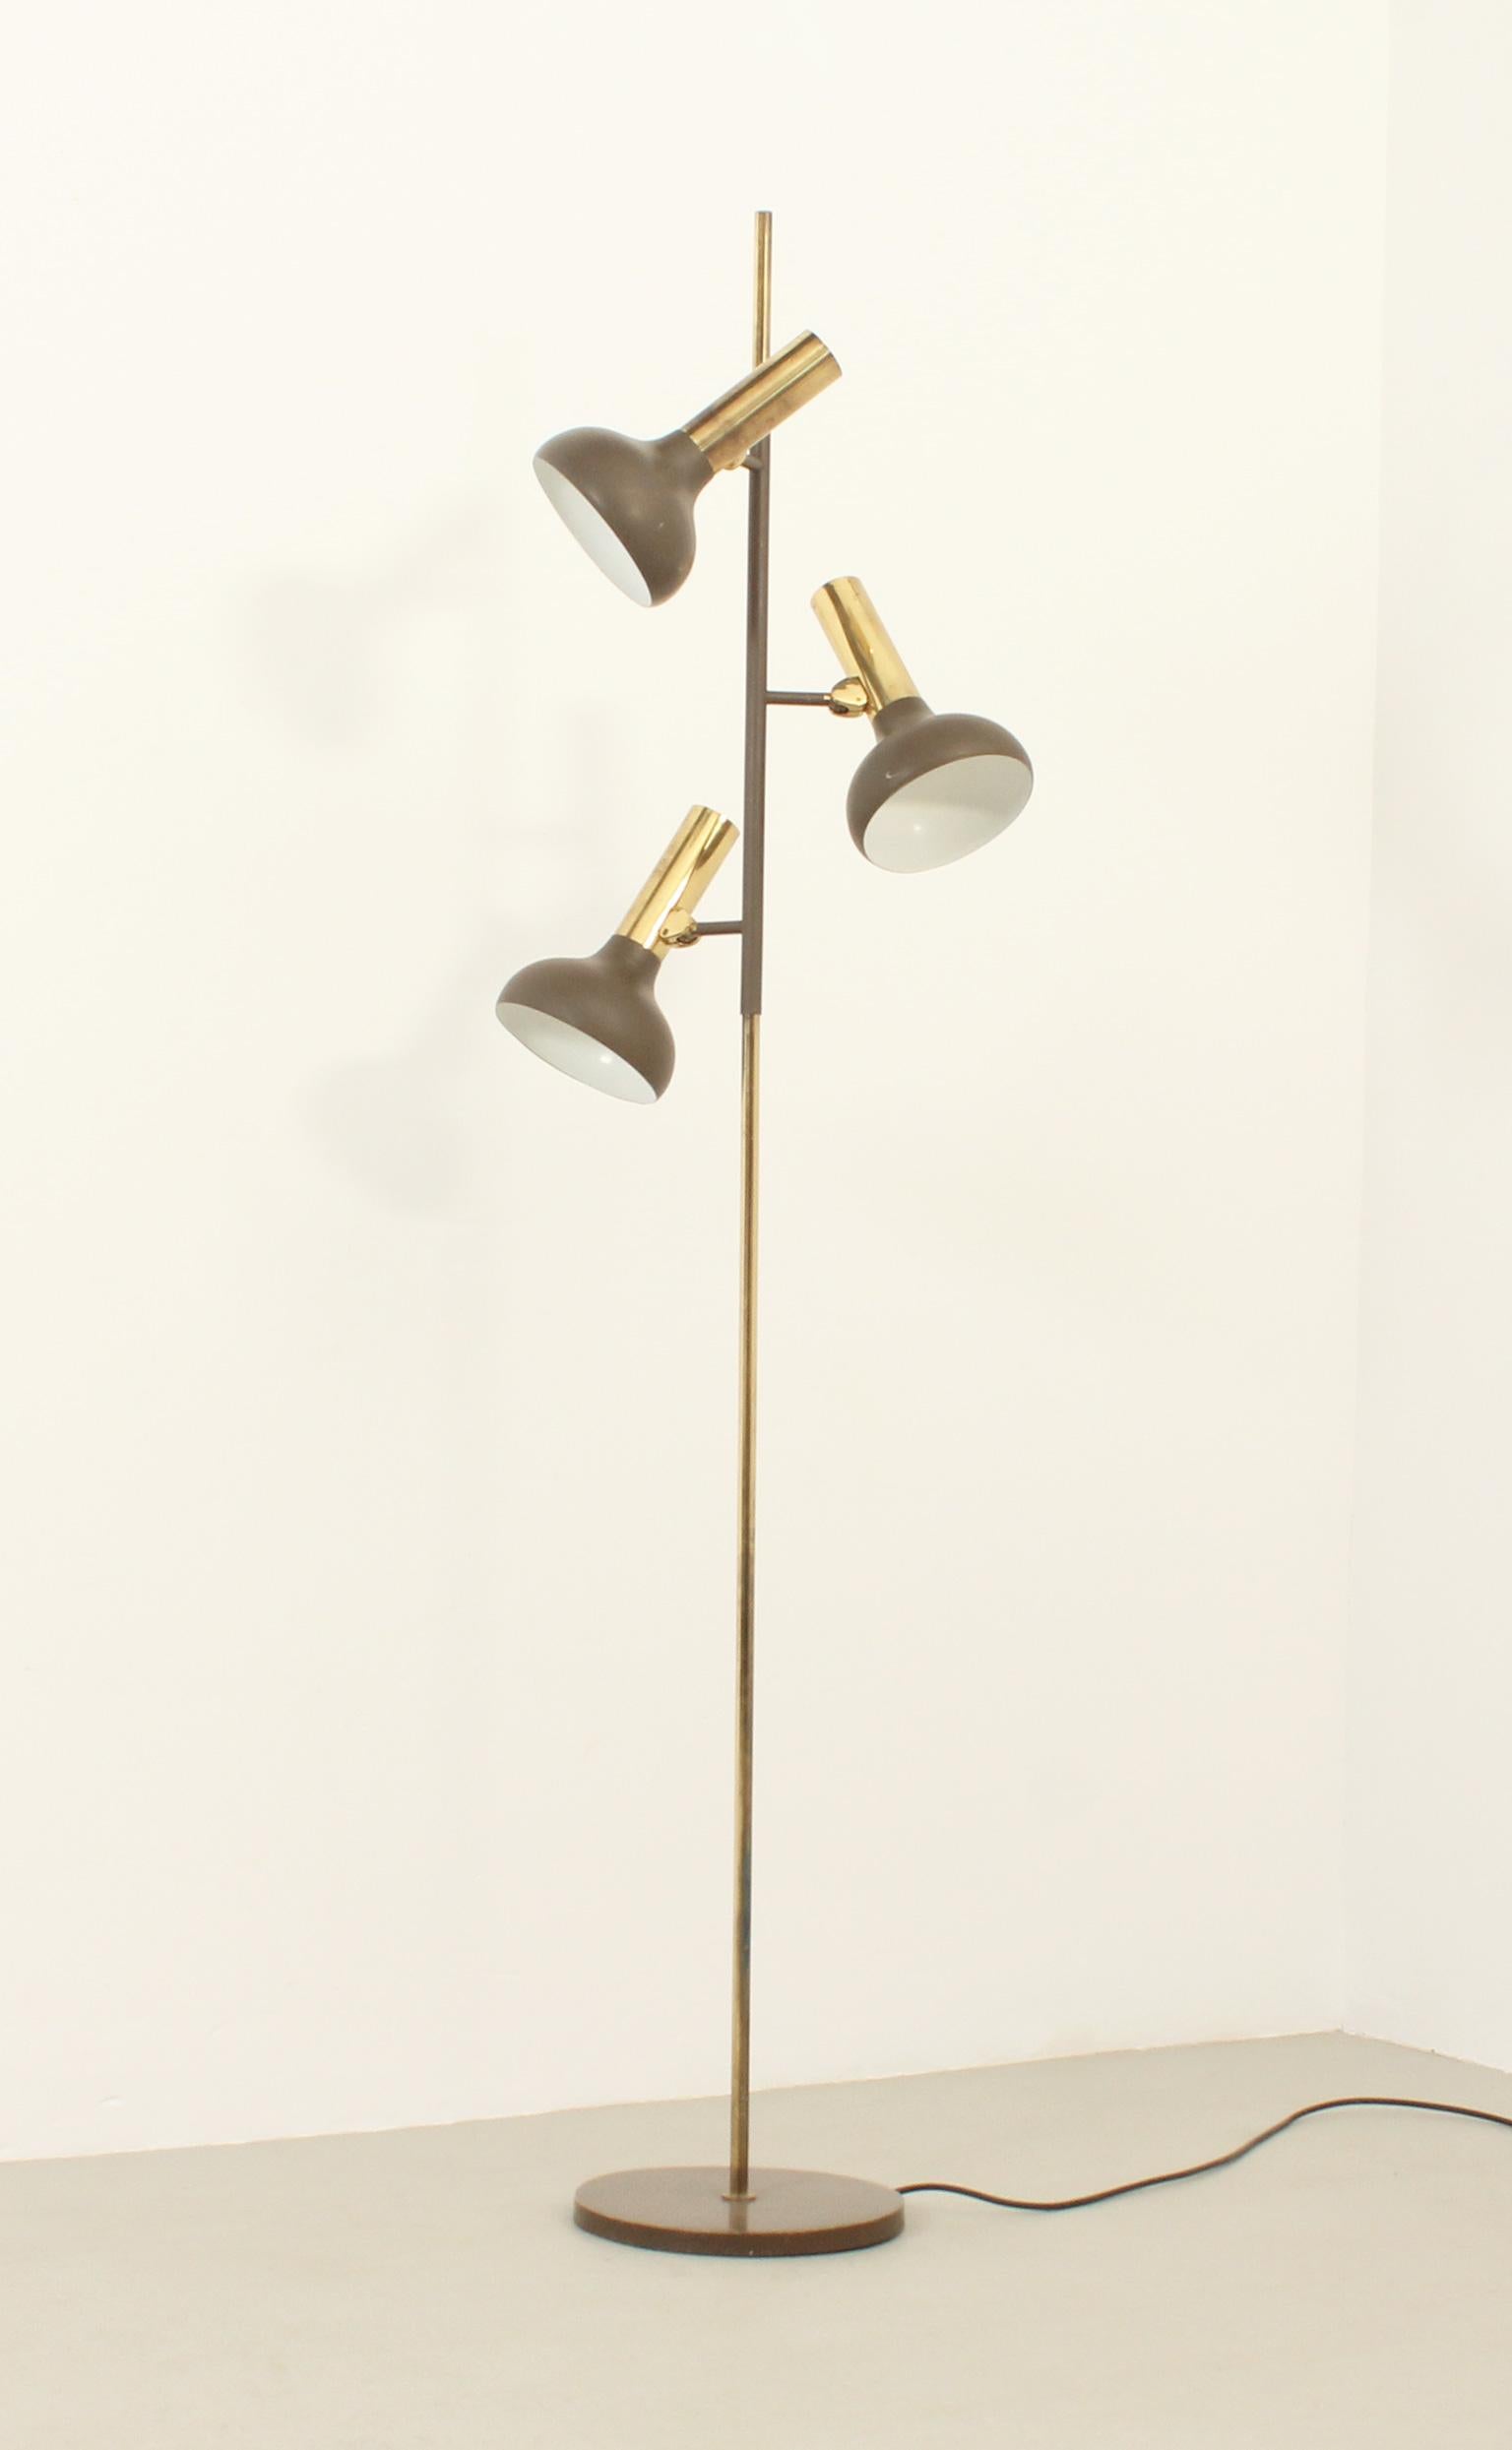 Floor lamp with three adjustable light points produced by Hustadt Leuchten, Germany, 1970's. Possibility of turning on one, two or three lights. Brass and brown lacquered metal. 